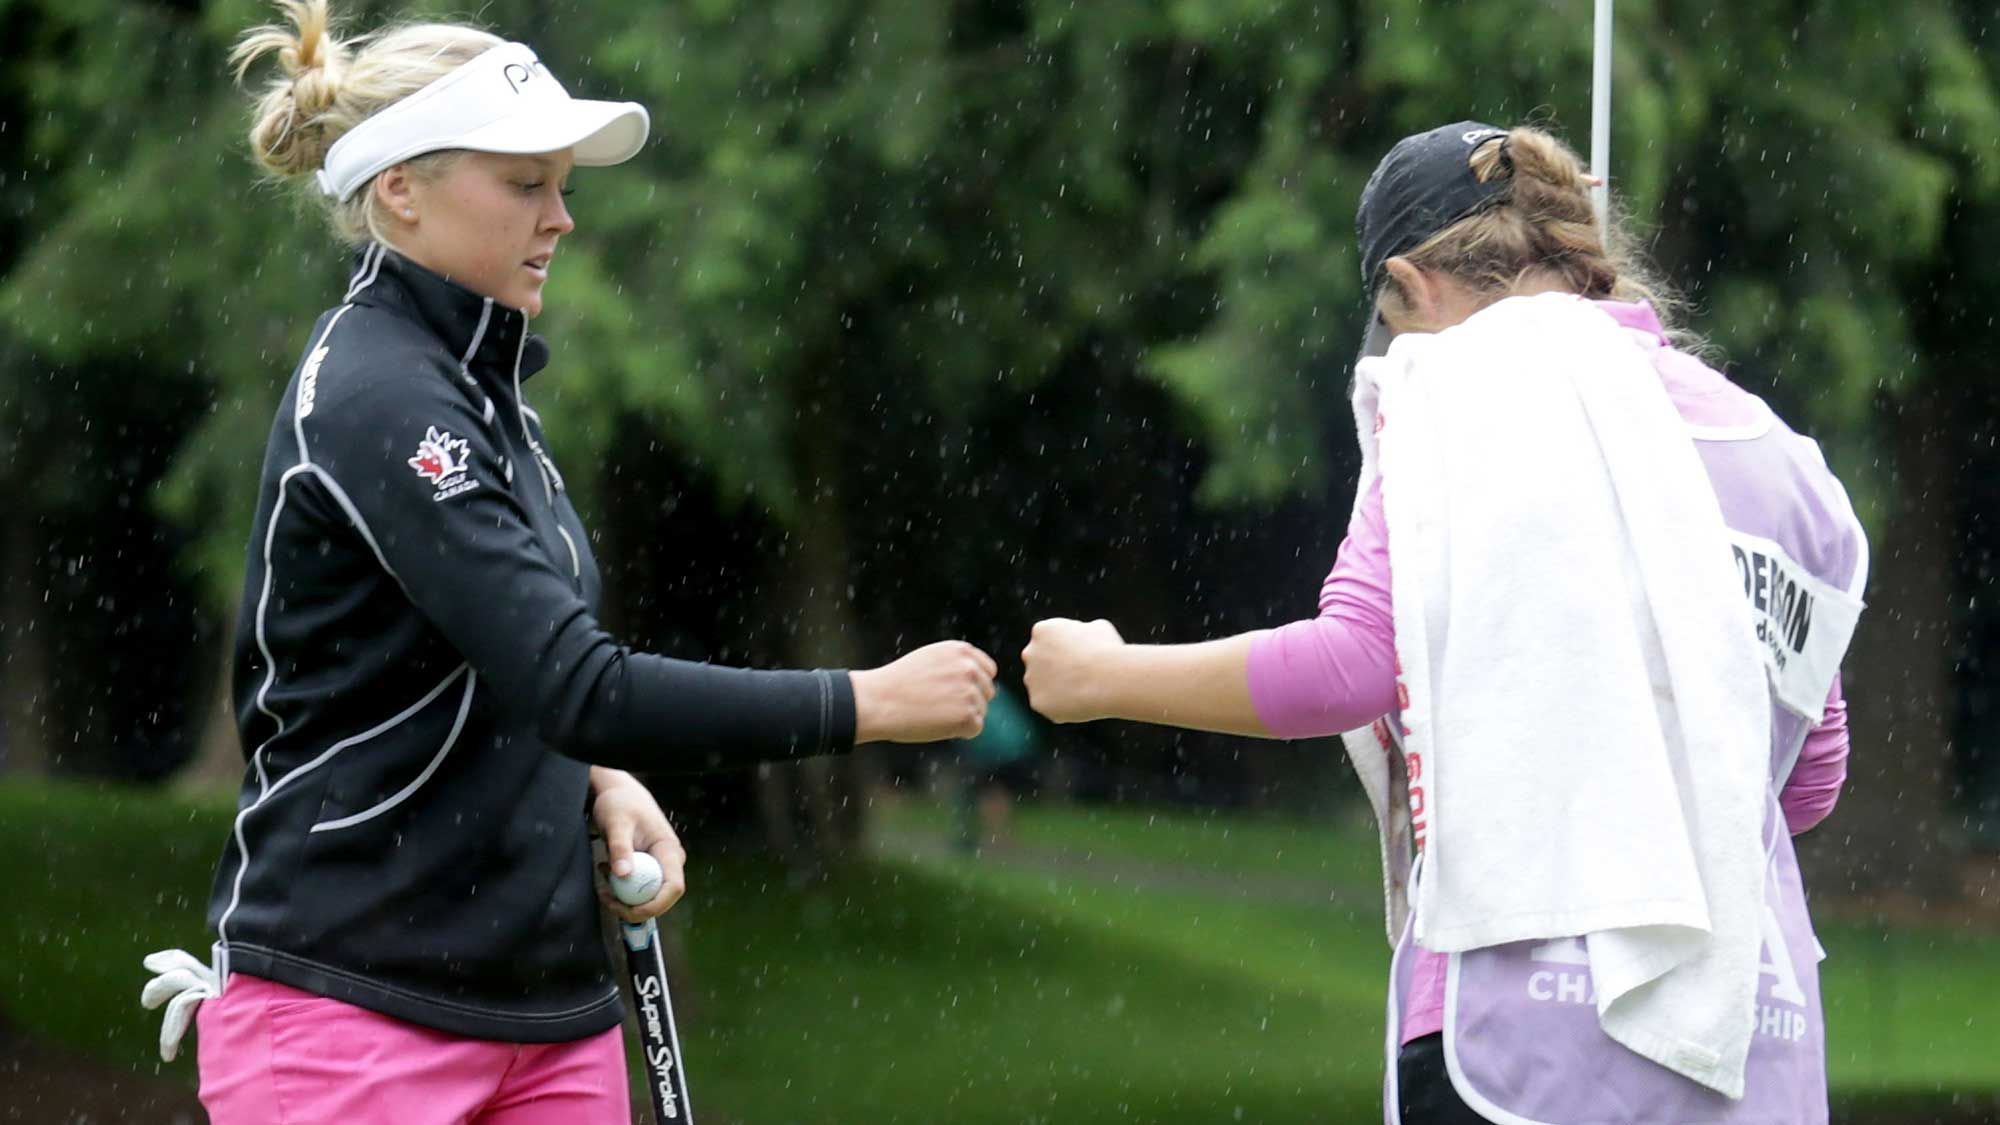 Brooke Henderson of Canada is congratulated by her sister/caddie Brittany after making a birdie putt on the ninth hole during the first round of the KPMG Women's PGA Championship